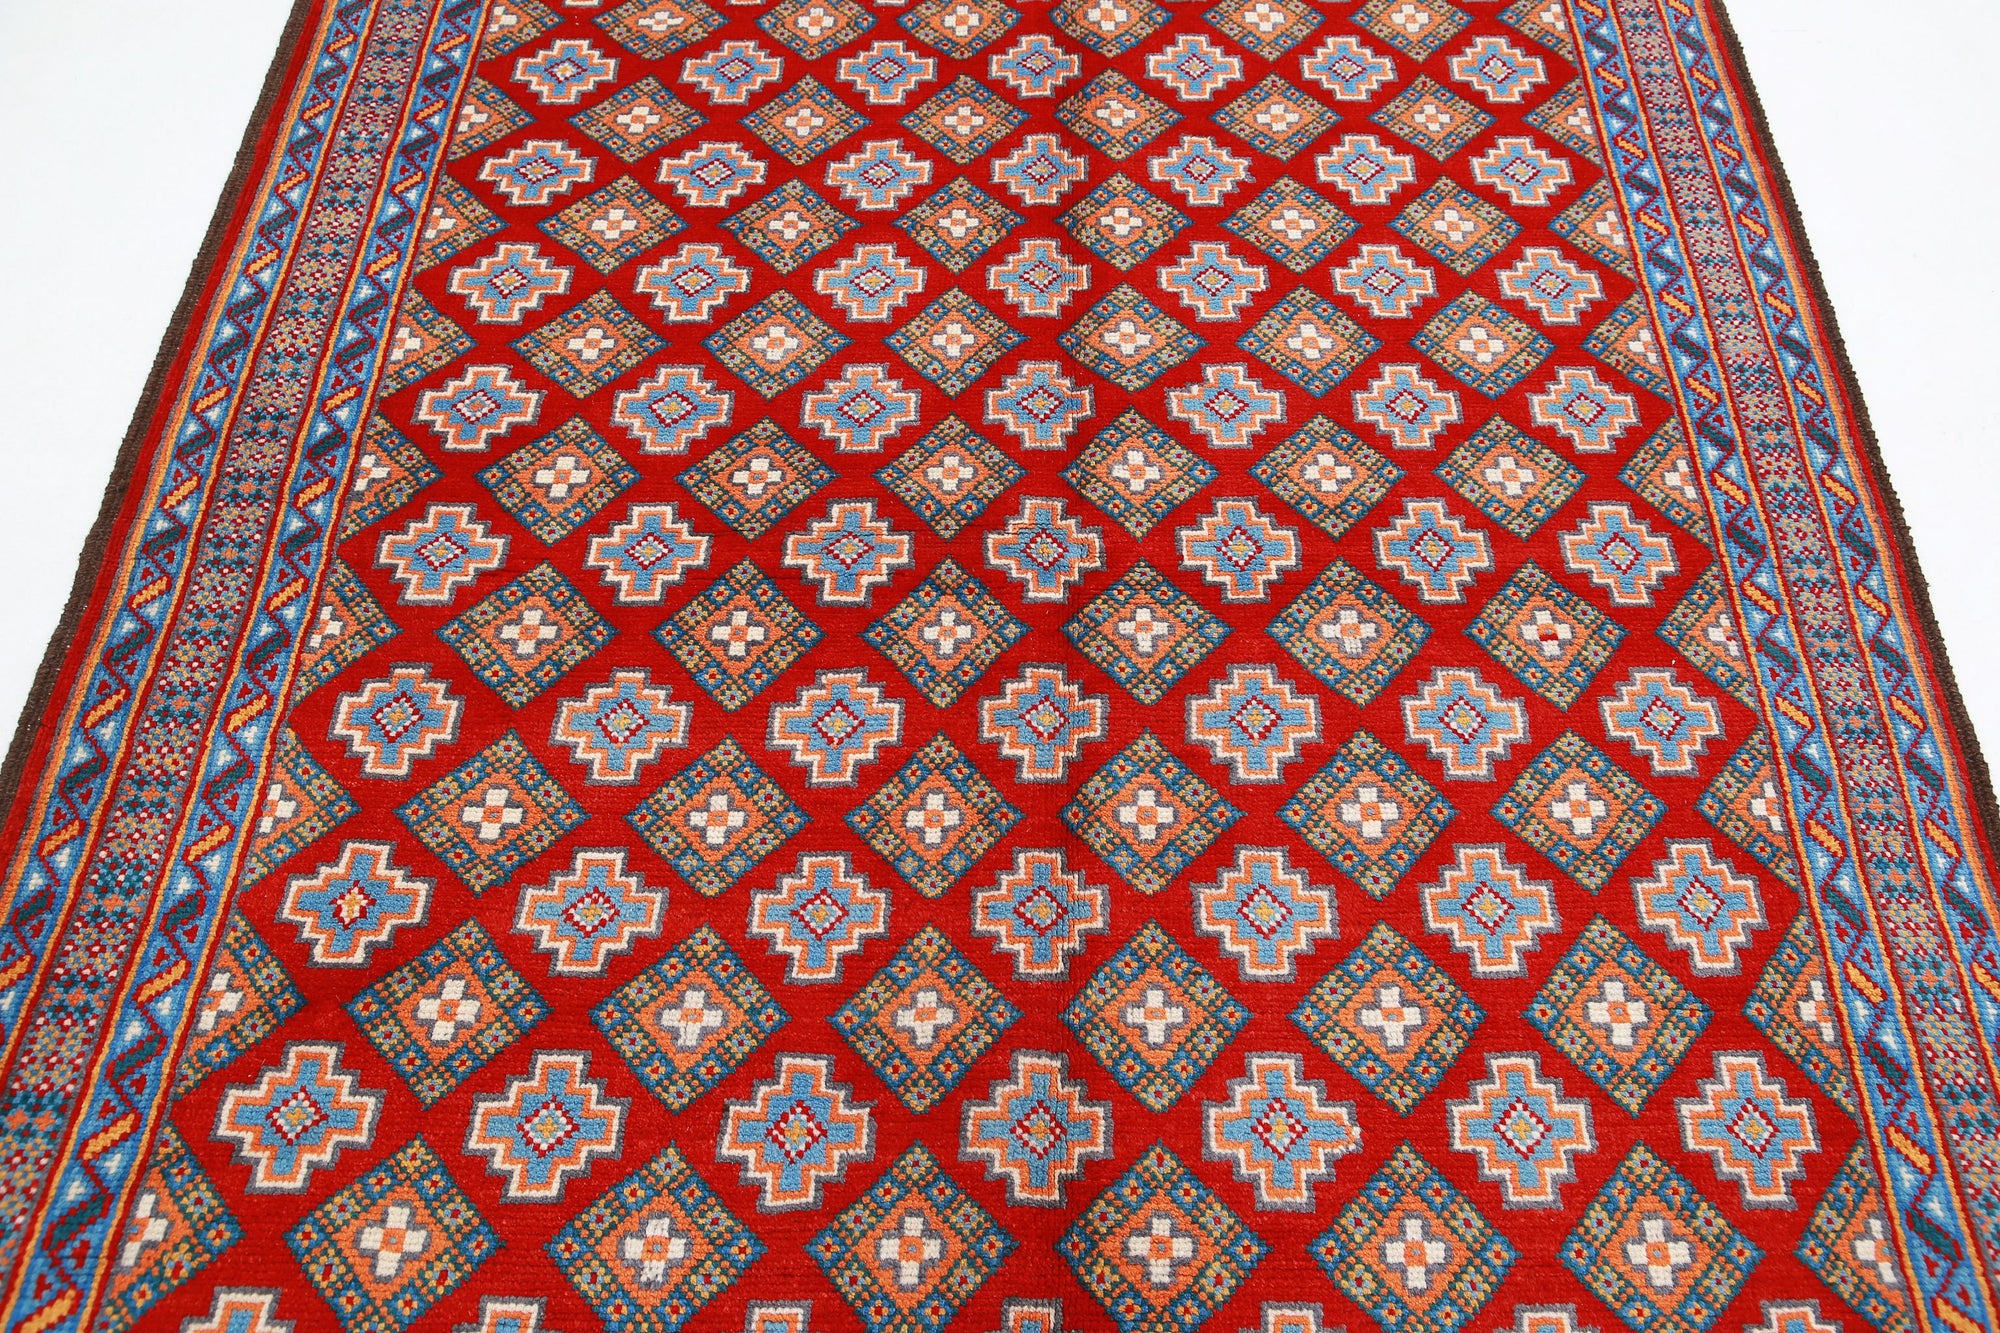 Revival-hand-knotted-qarghani-wool-rug-5014223-4.jpg